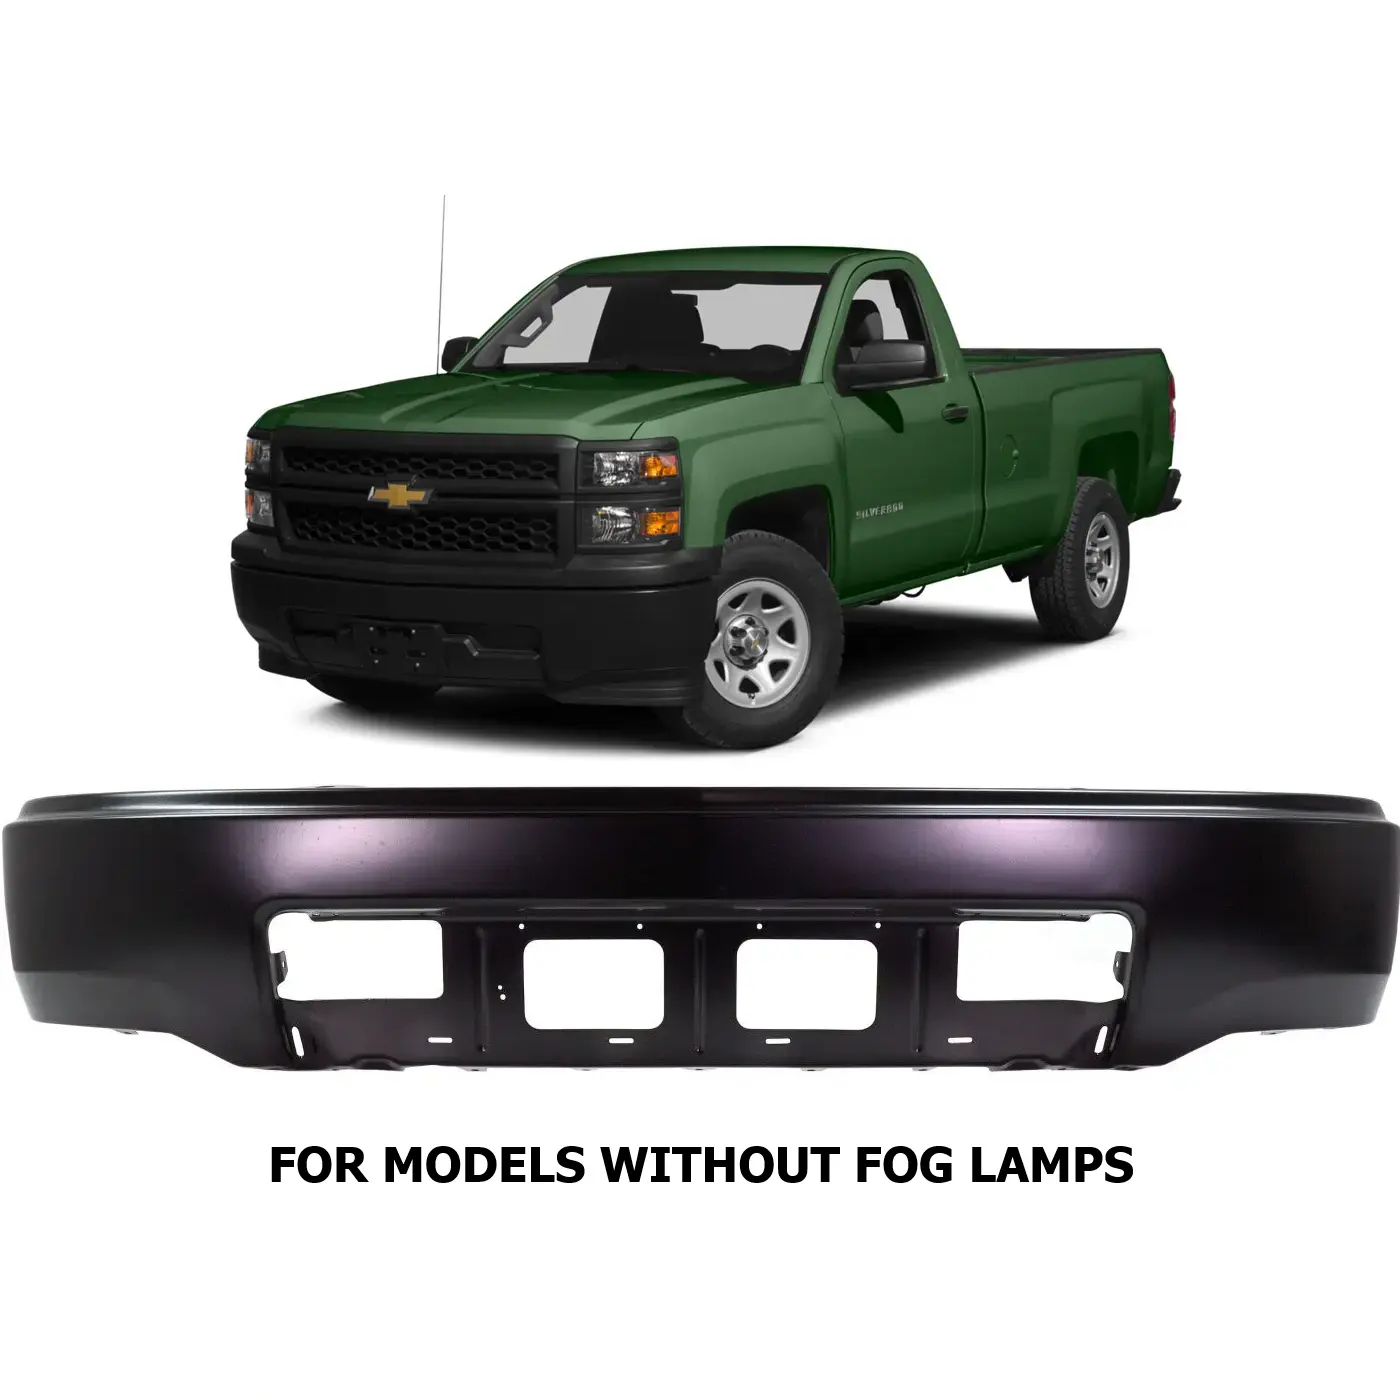 USA In Stock NEW Paintable Car Front Bumper For 2014-2015 Silverado 1500 Without Fog Lamps